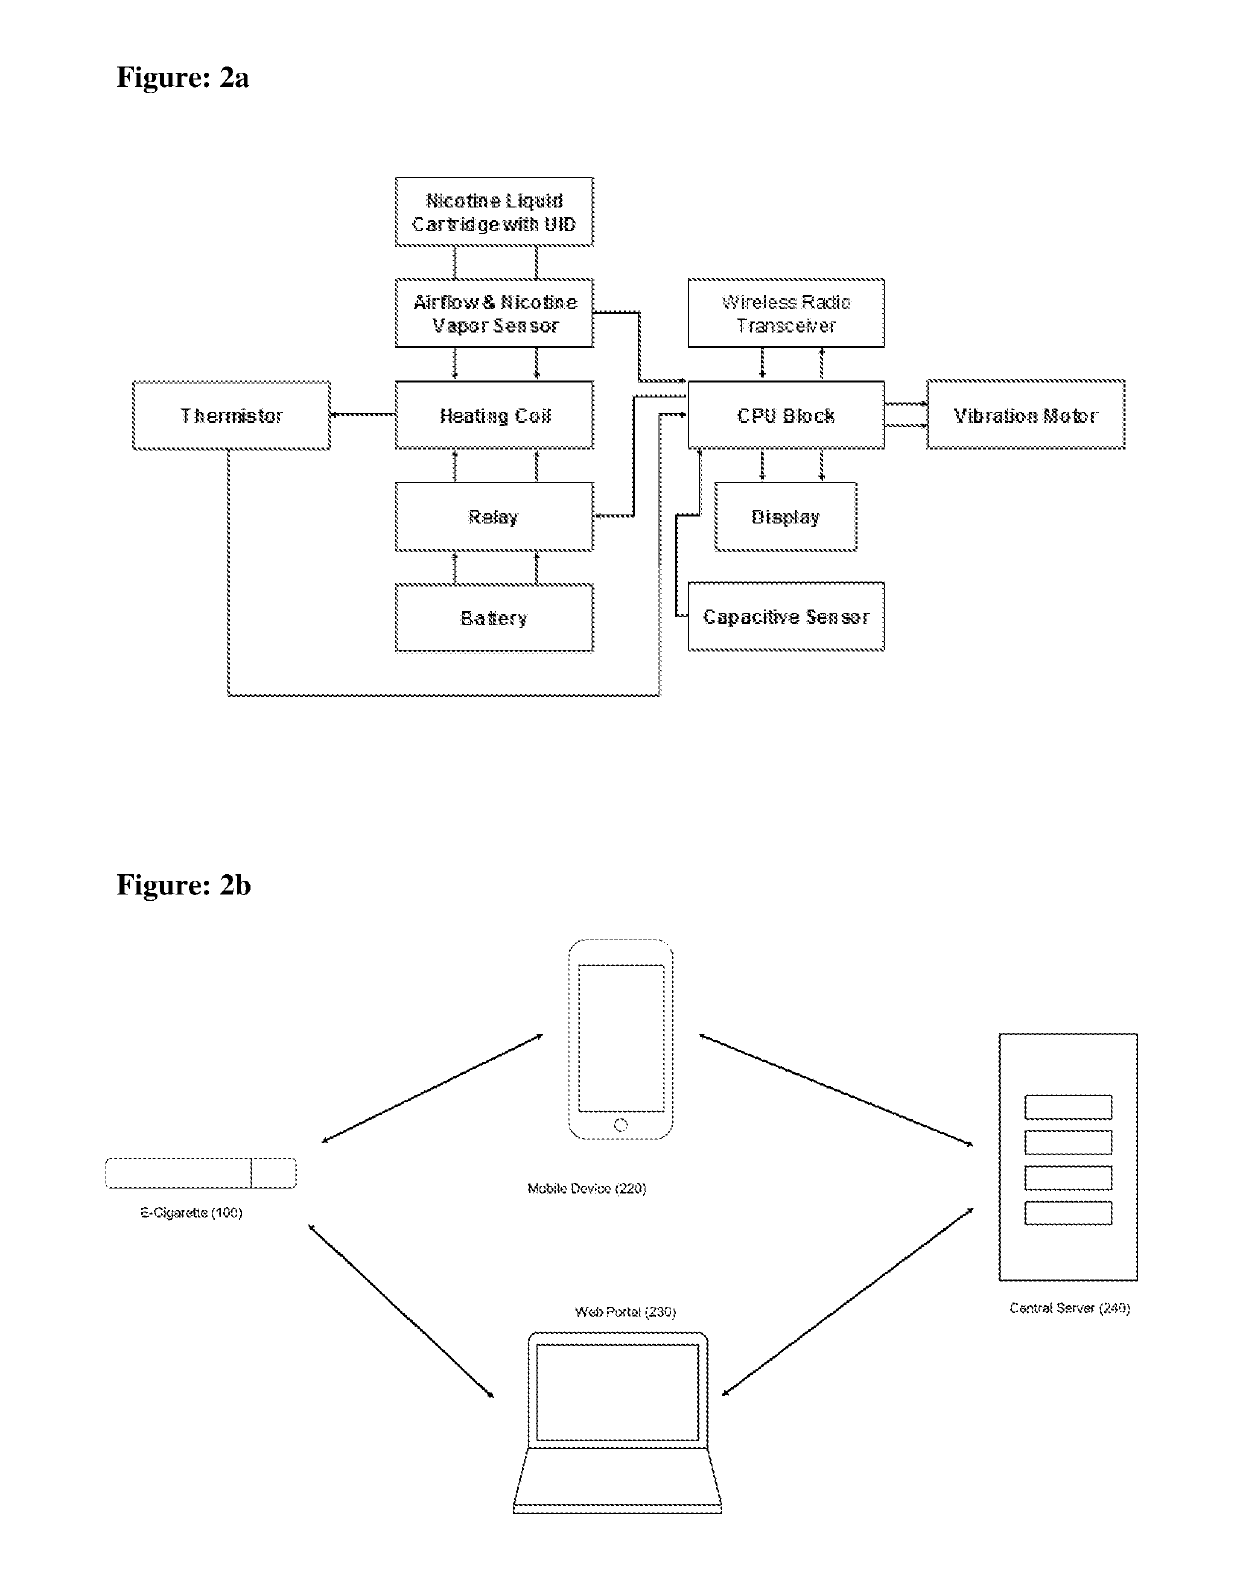 A system and method of monitoring and controlling the usage behaviour of an electronic cigarette